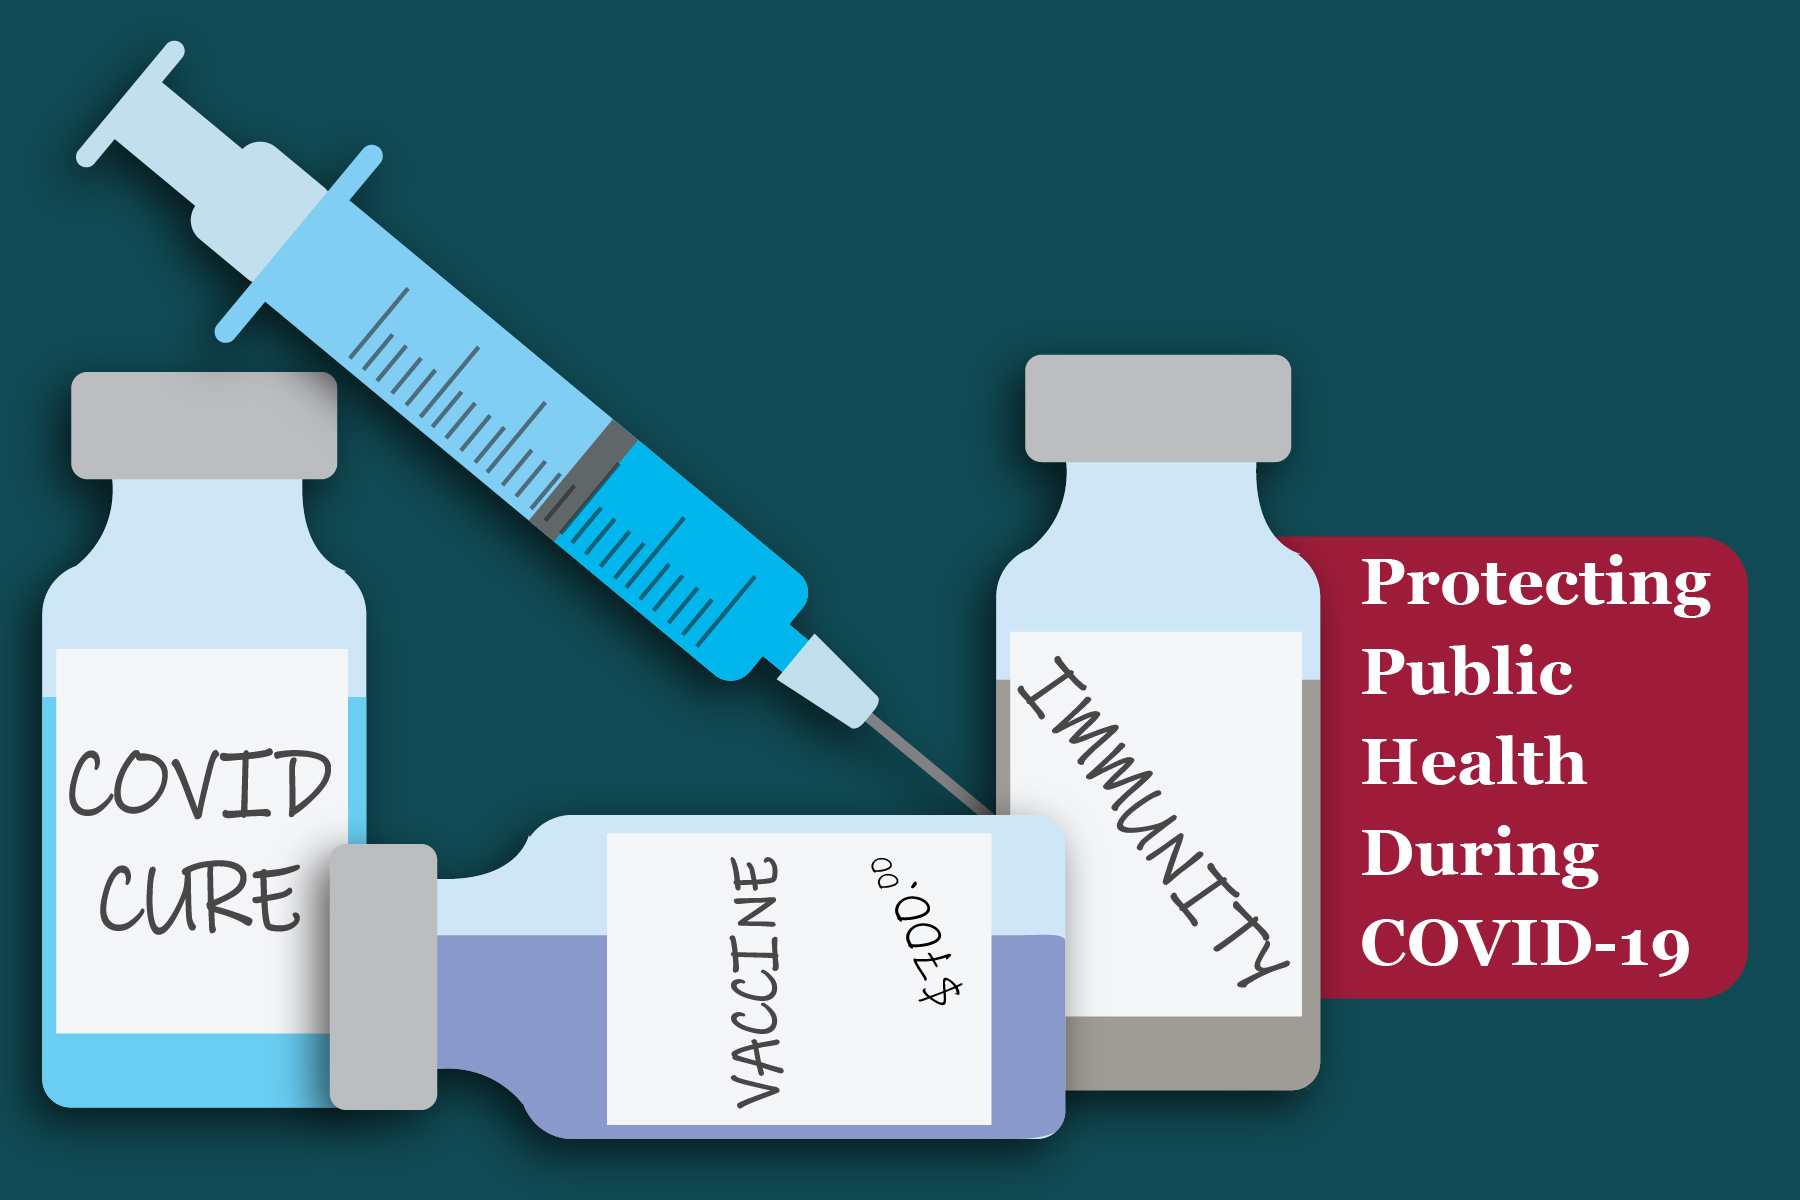 Protecting Public Health During COVID-19